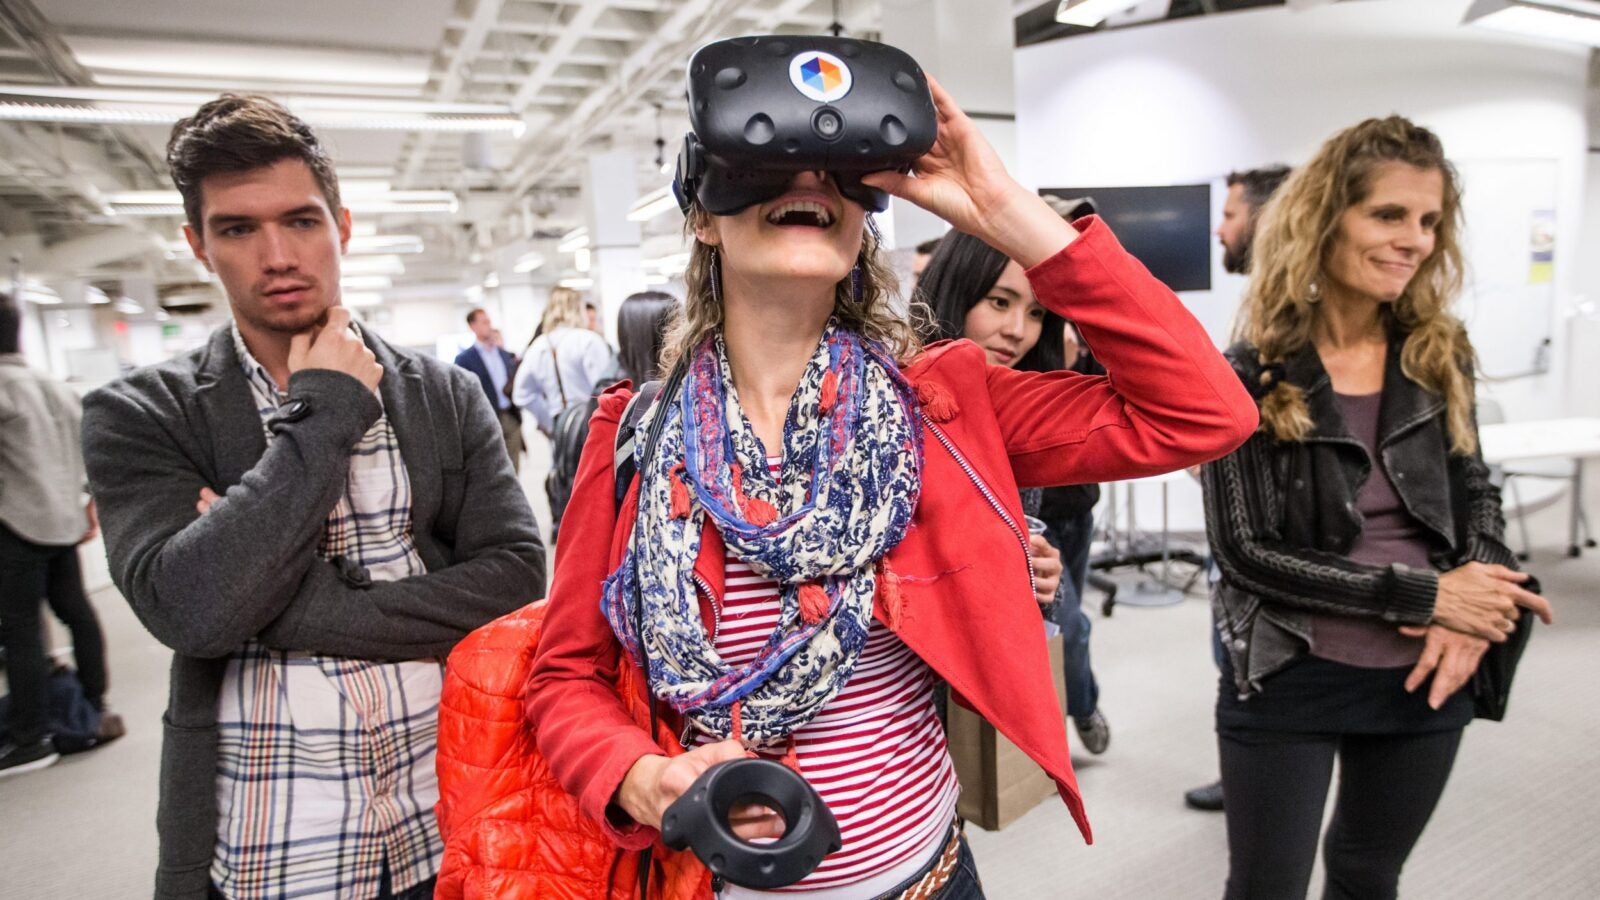 Students test out the HTC Vive virtual reality system at HUBweek.